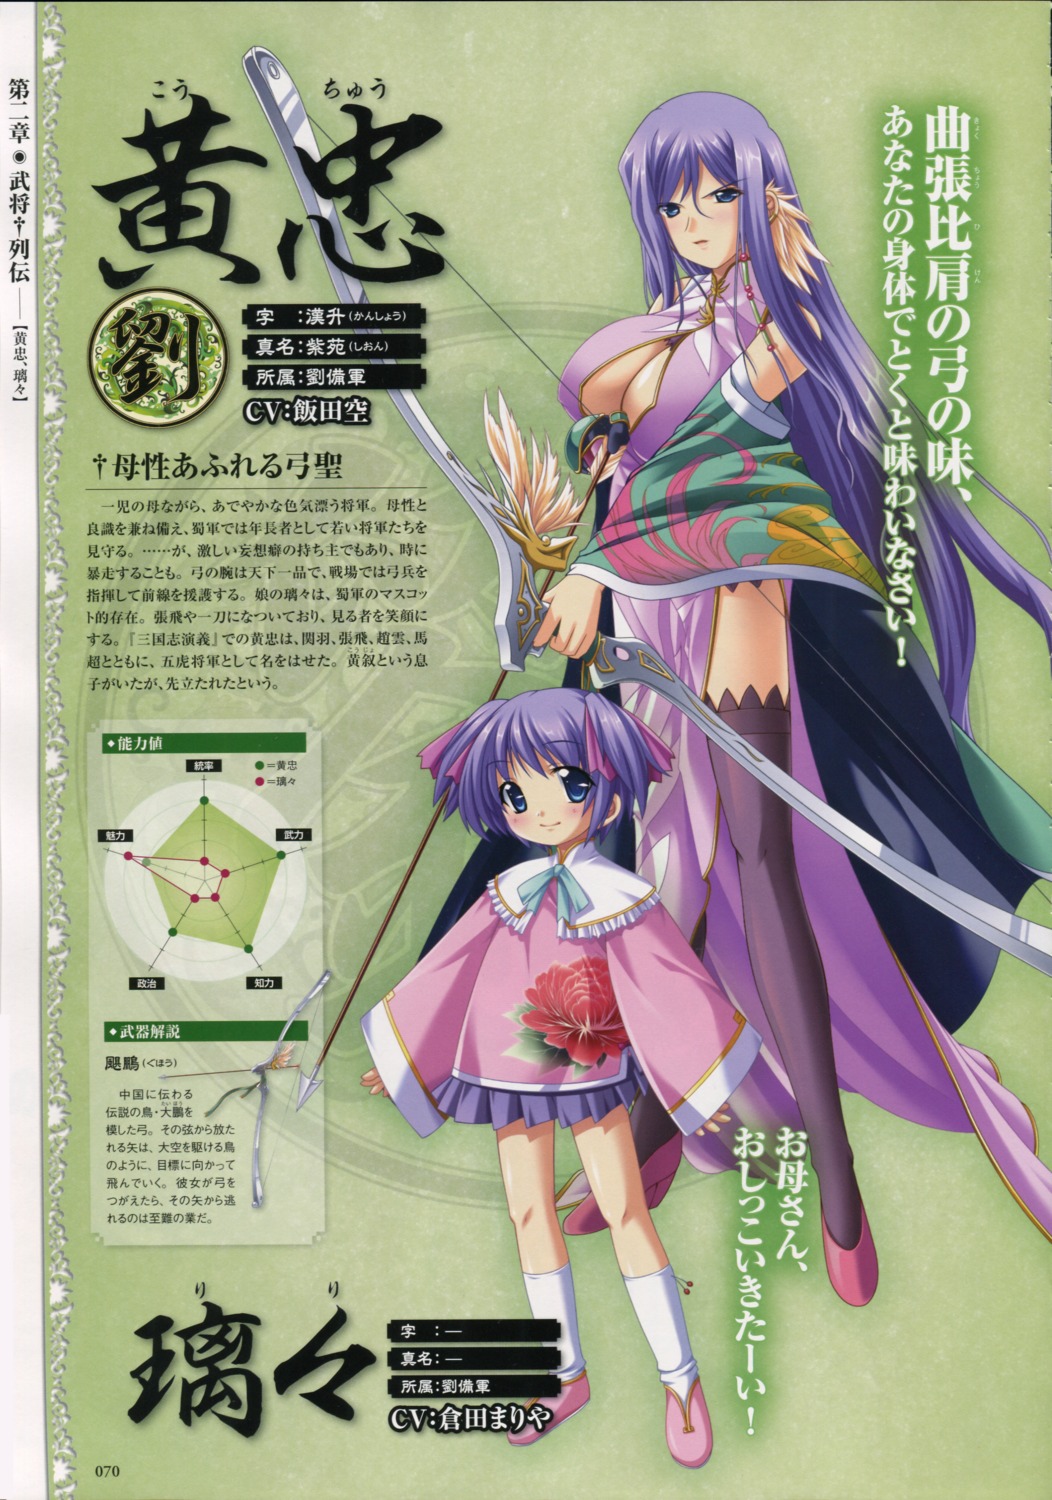 asian_clothes baseson chinadress cleavage heels koihime_musou kouchuu profile_page riri thighhighs weapon